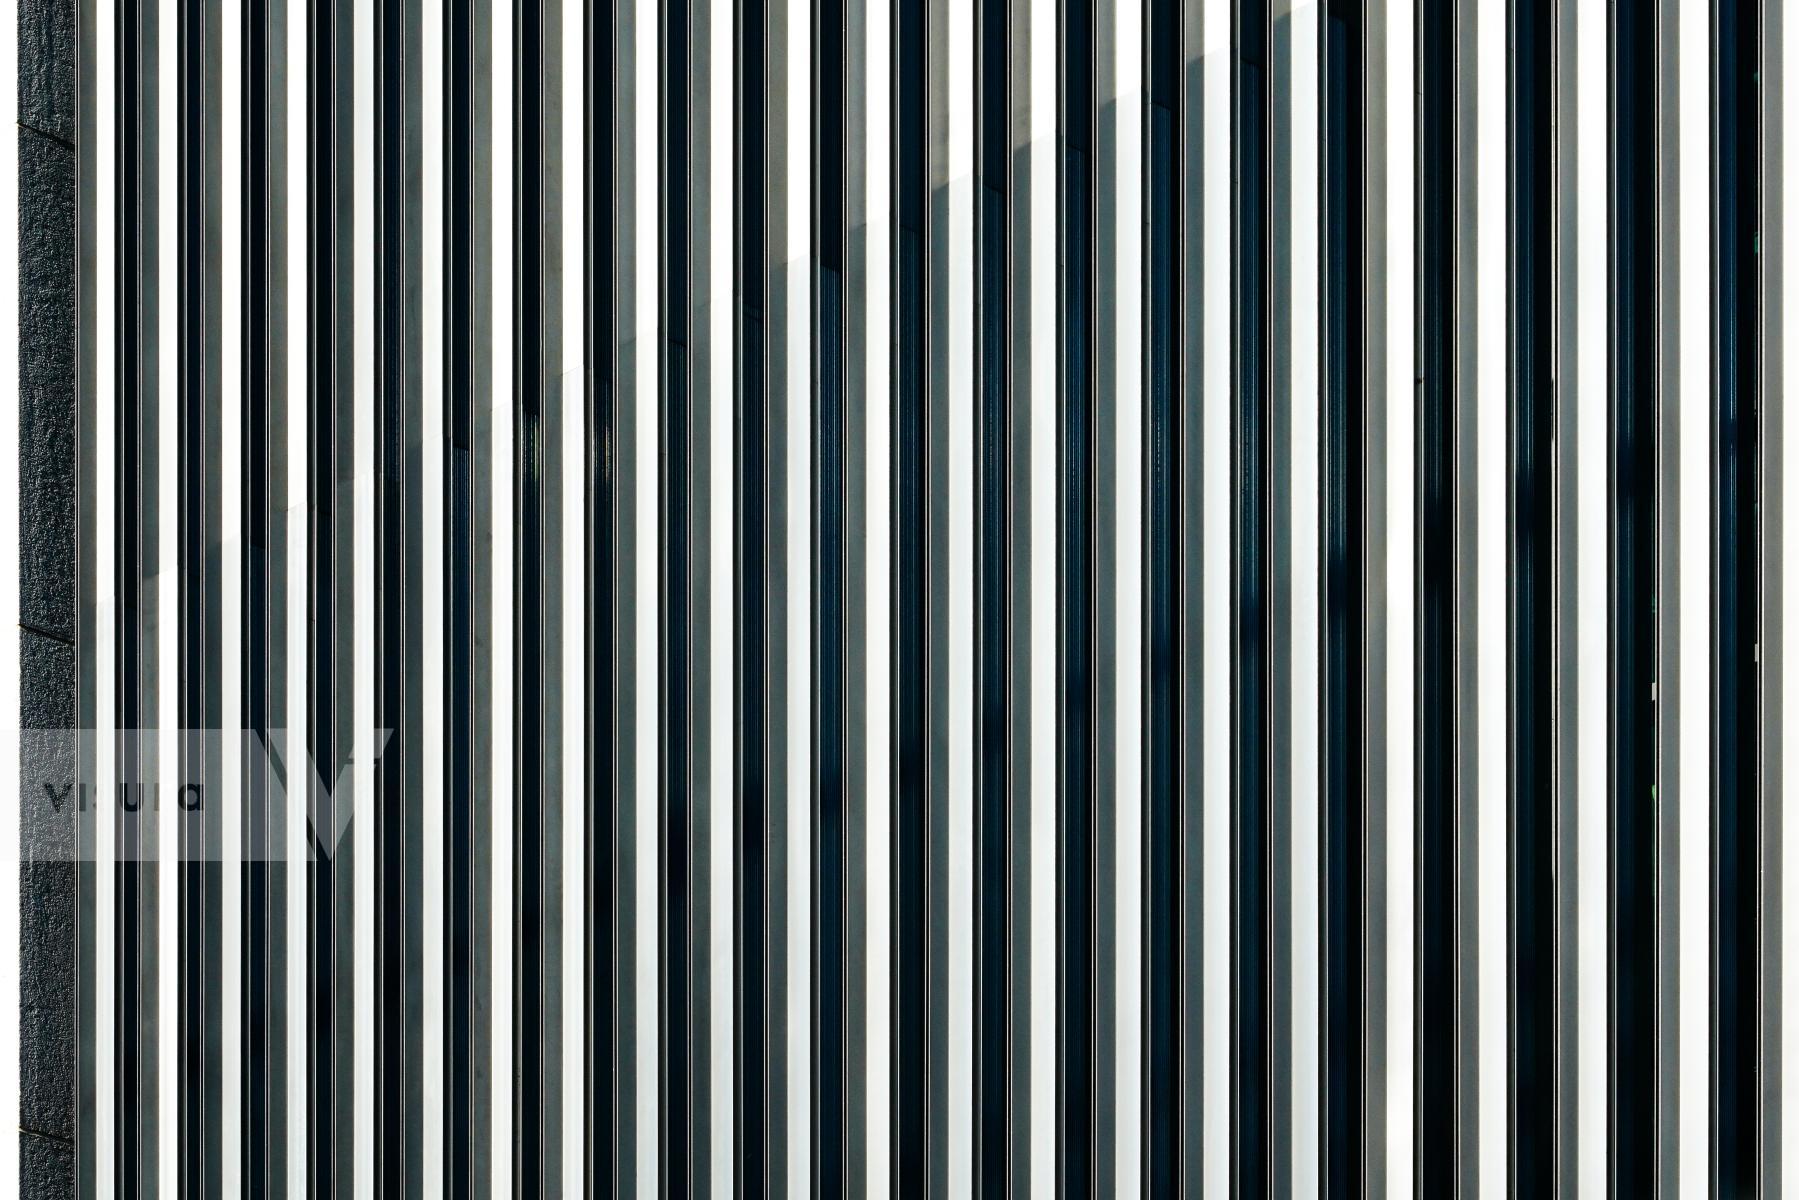 Purchase Urban Stripes: Verticality by Michael Nguyen